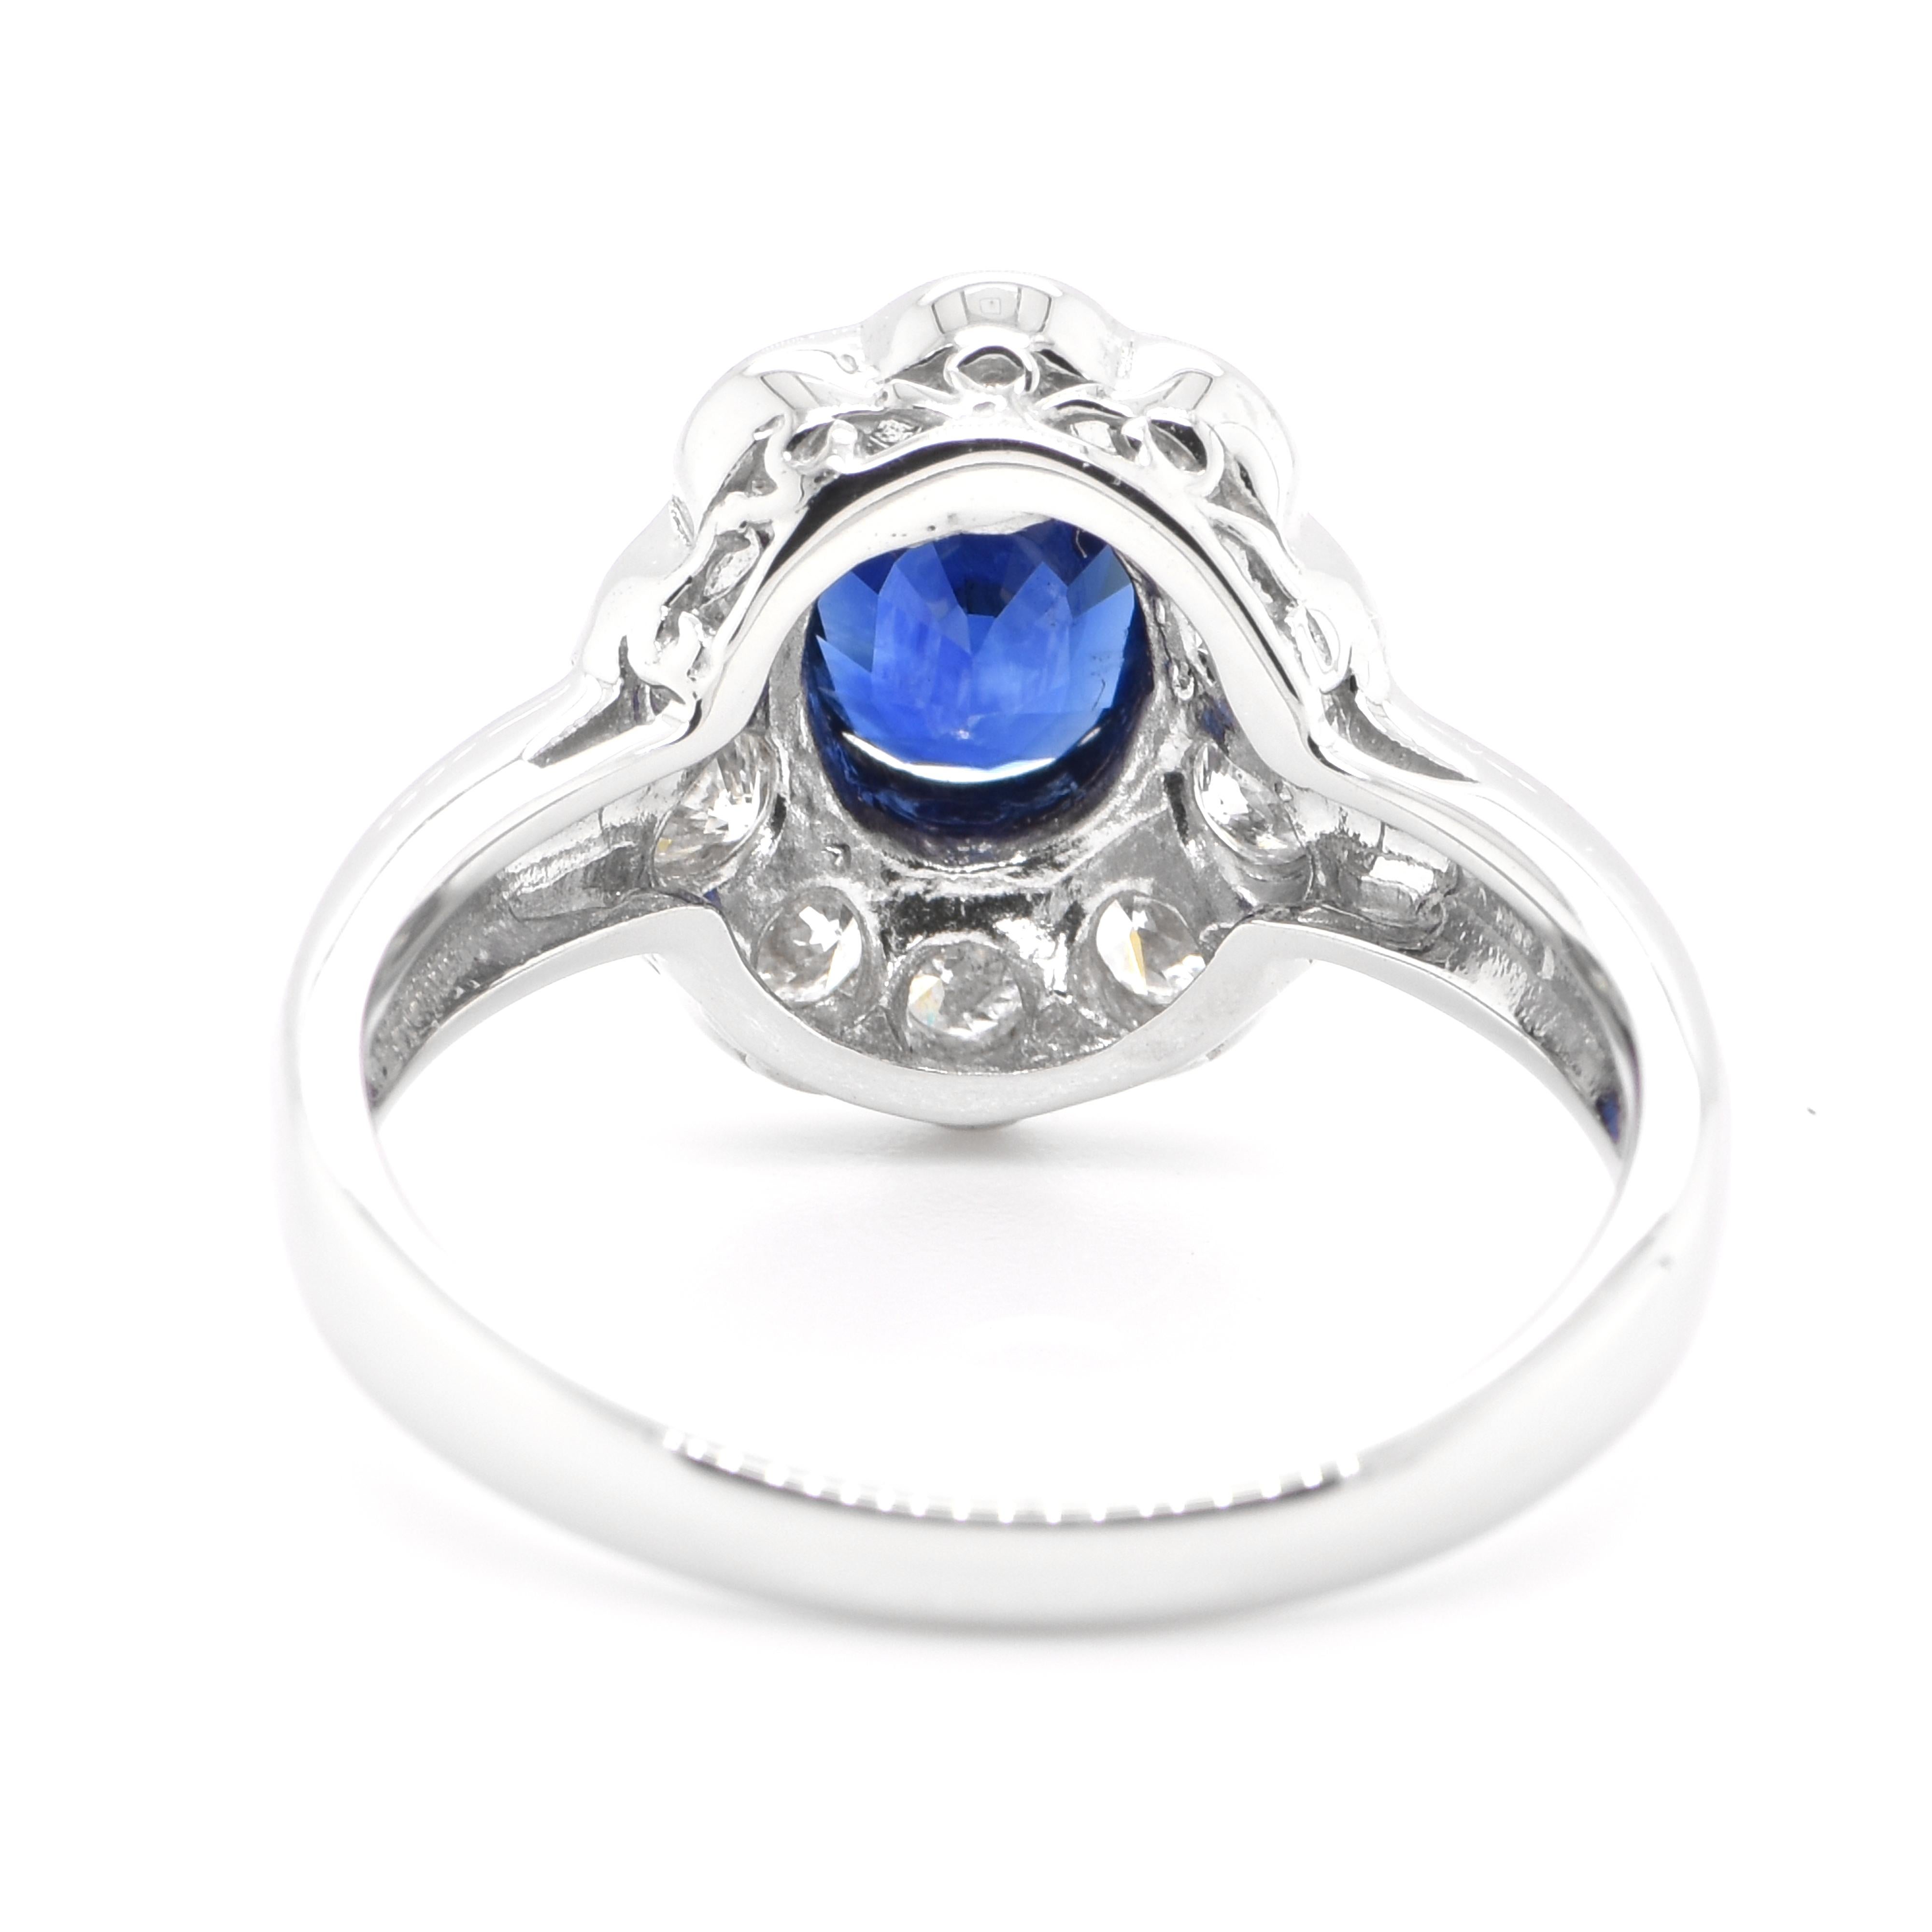 Women's 1.18 Carat Natural Sapphire and Diamond Antique Ring Set in Platinum For Sale